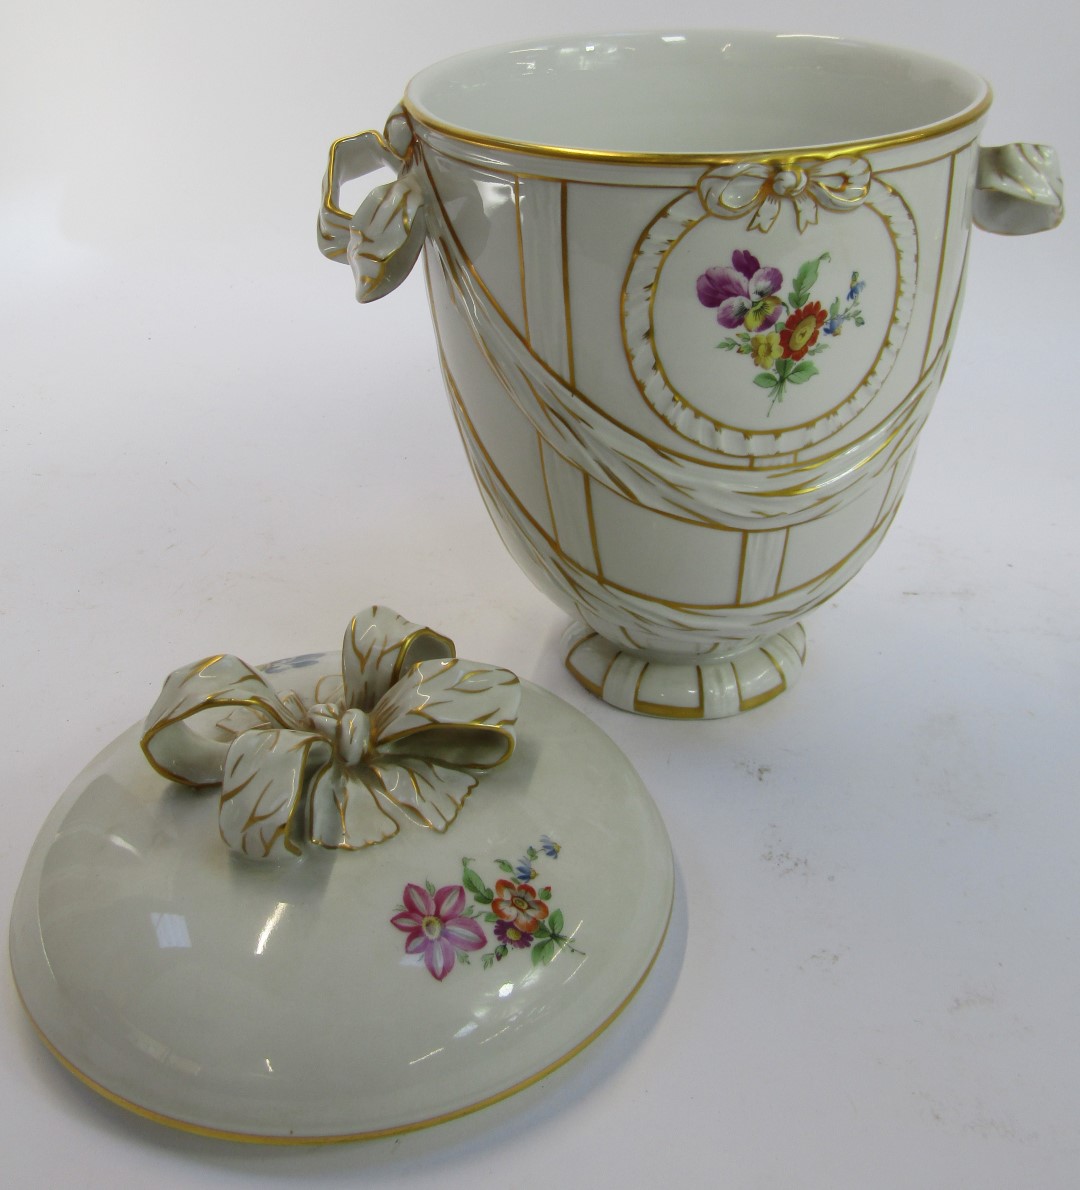 A KPM Berlin porcelain jar and cover, on a cream ground decorated with ribbons, bows and floral spra - Image 3 of 5